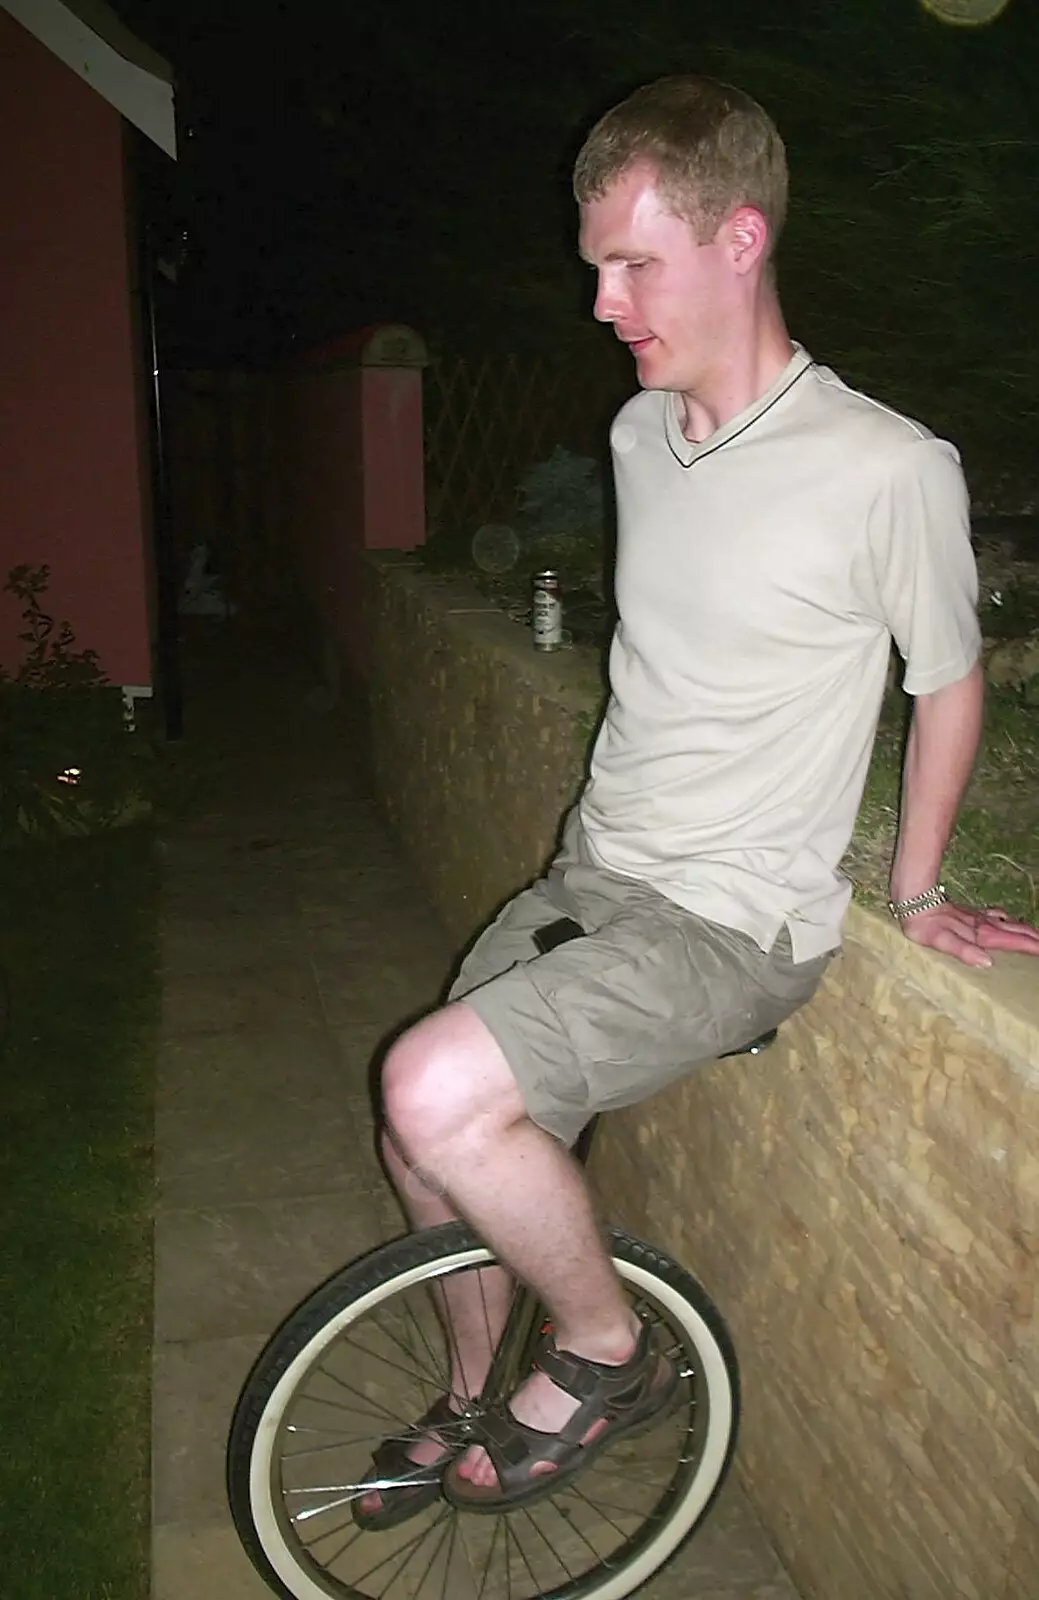 Andy has a unicycle, from The BSCC in Debenham, and Bill's Housewarming Barbie, Yaxley, Suffolk - 31st July 2004